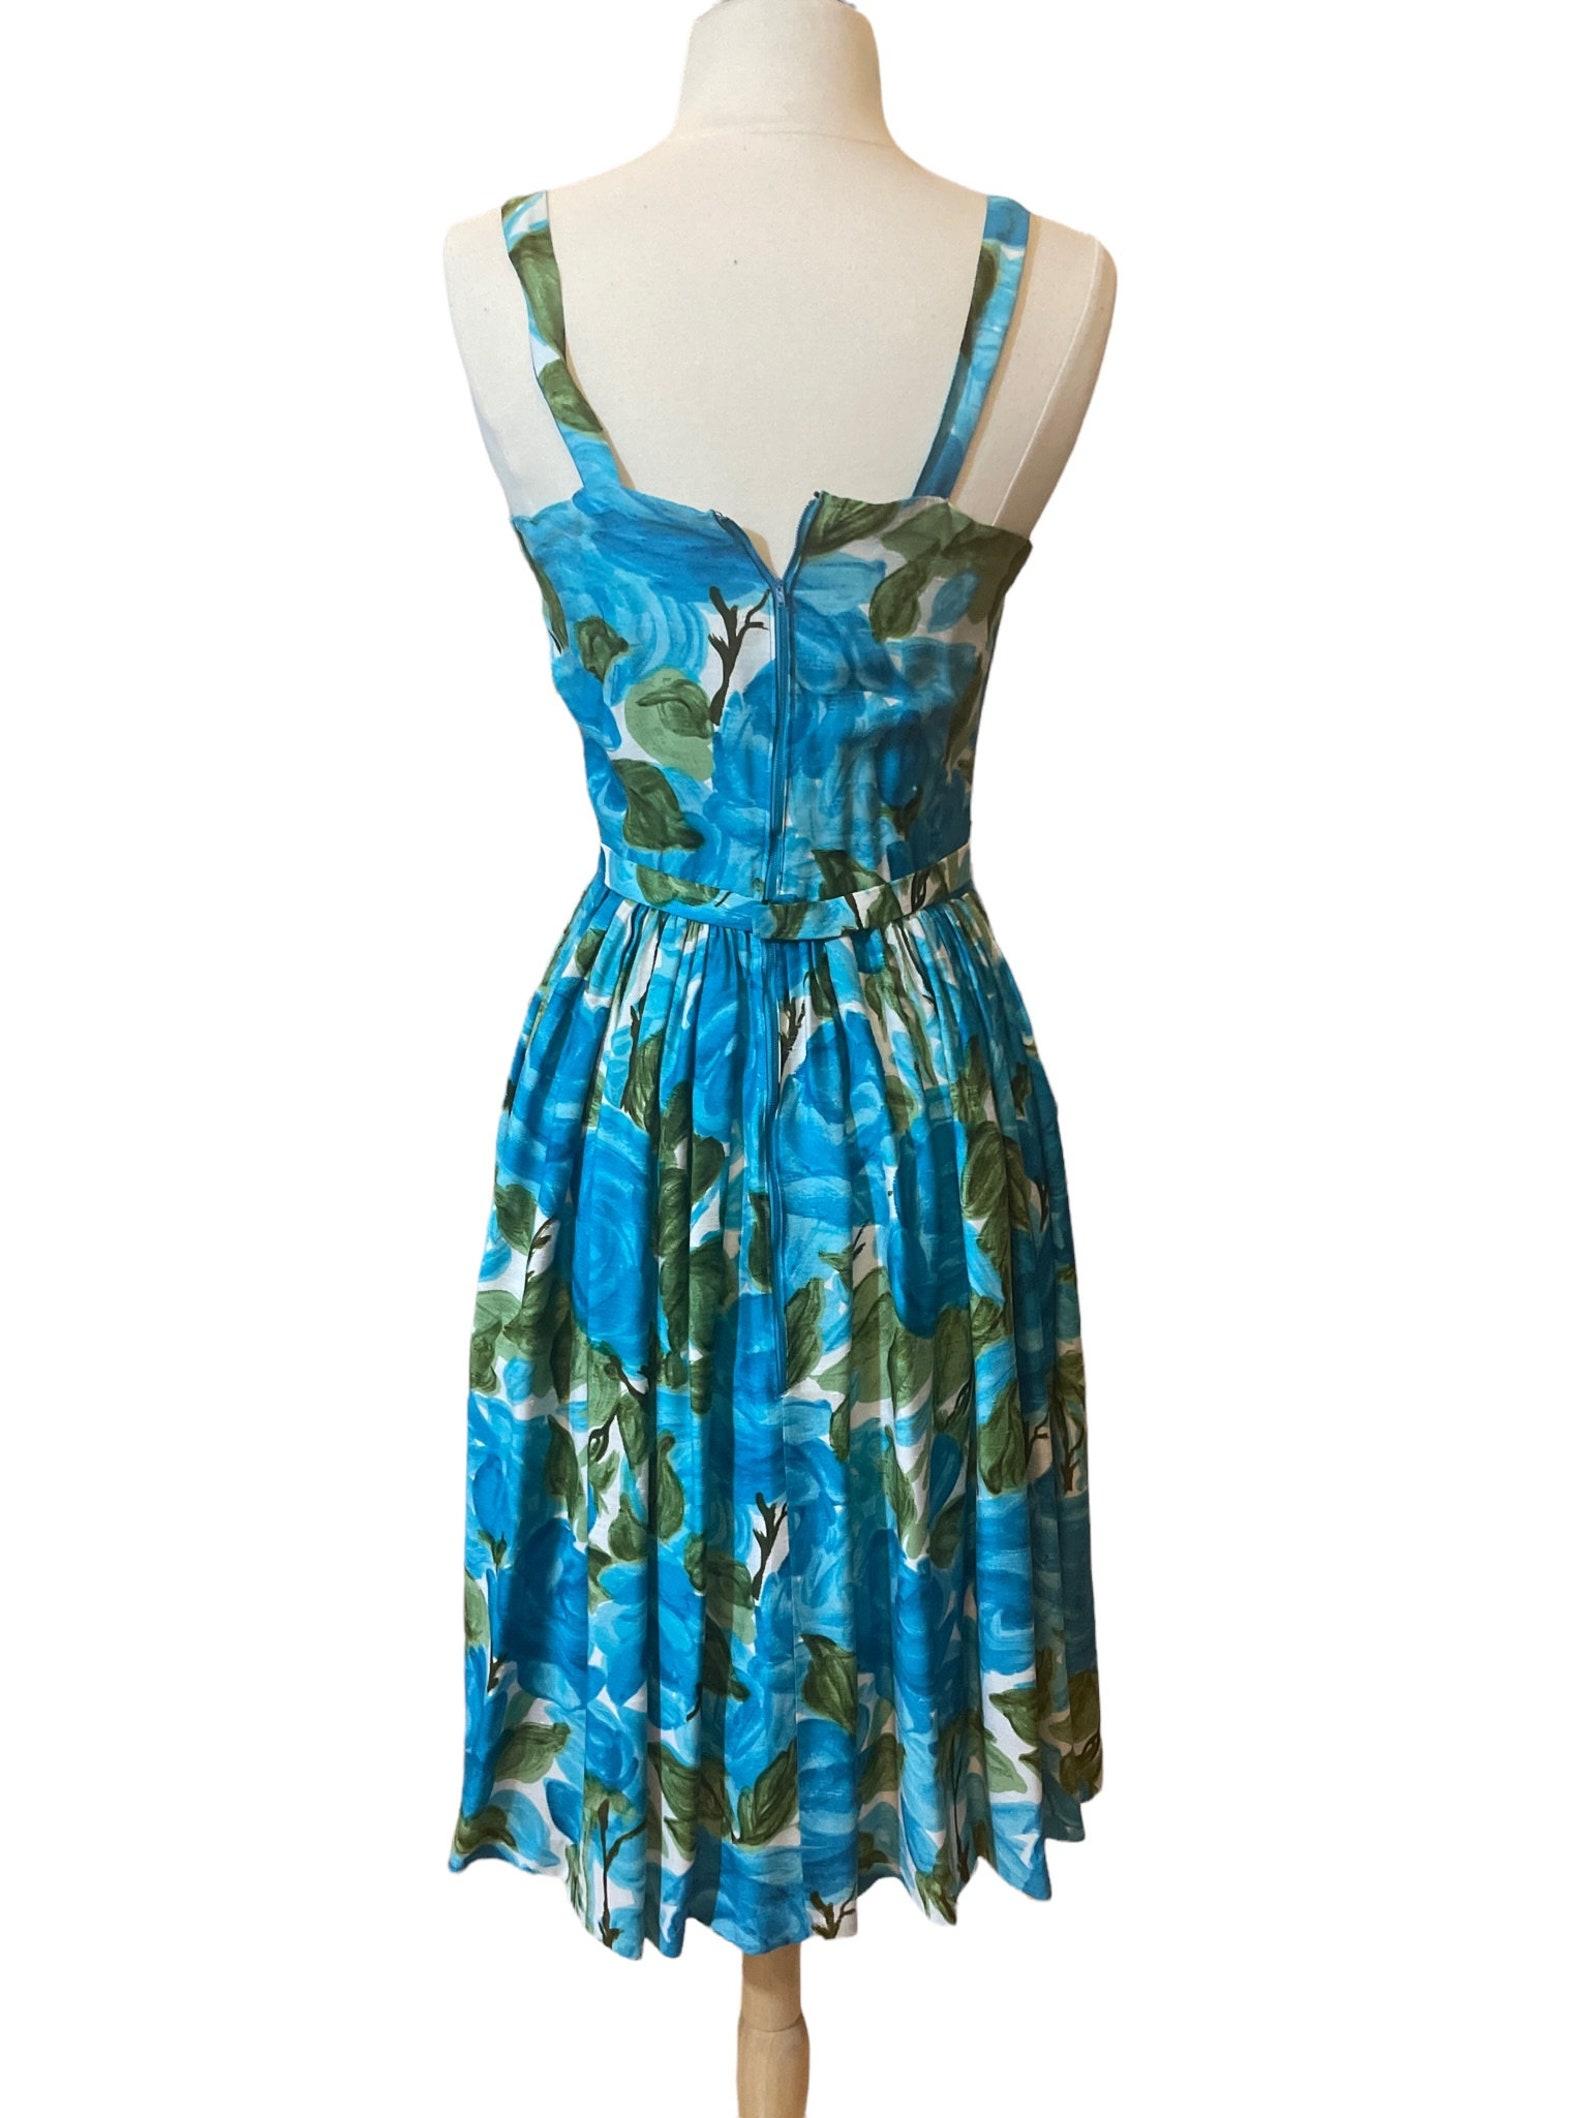 Blue and Green Watercolor Floral Sun Dress, Circa 1950s For Sale 5